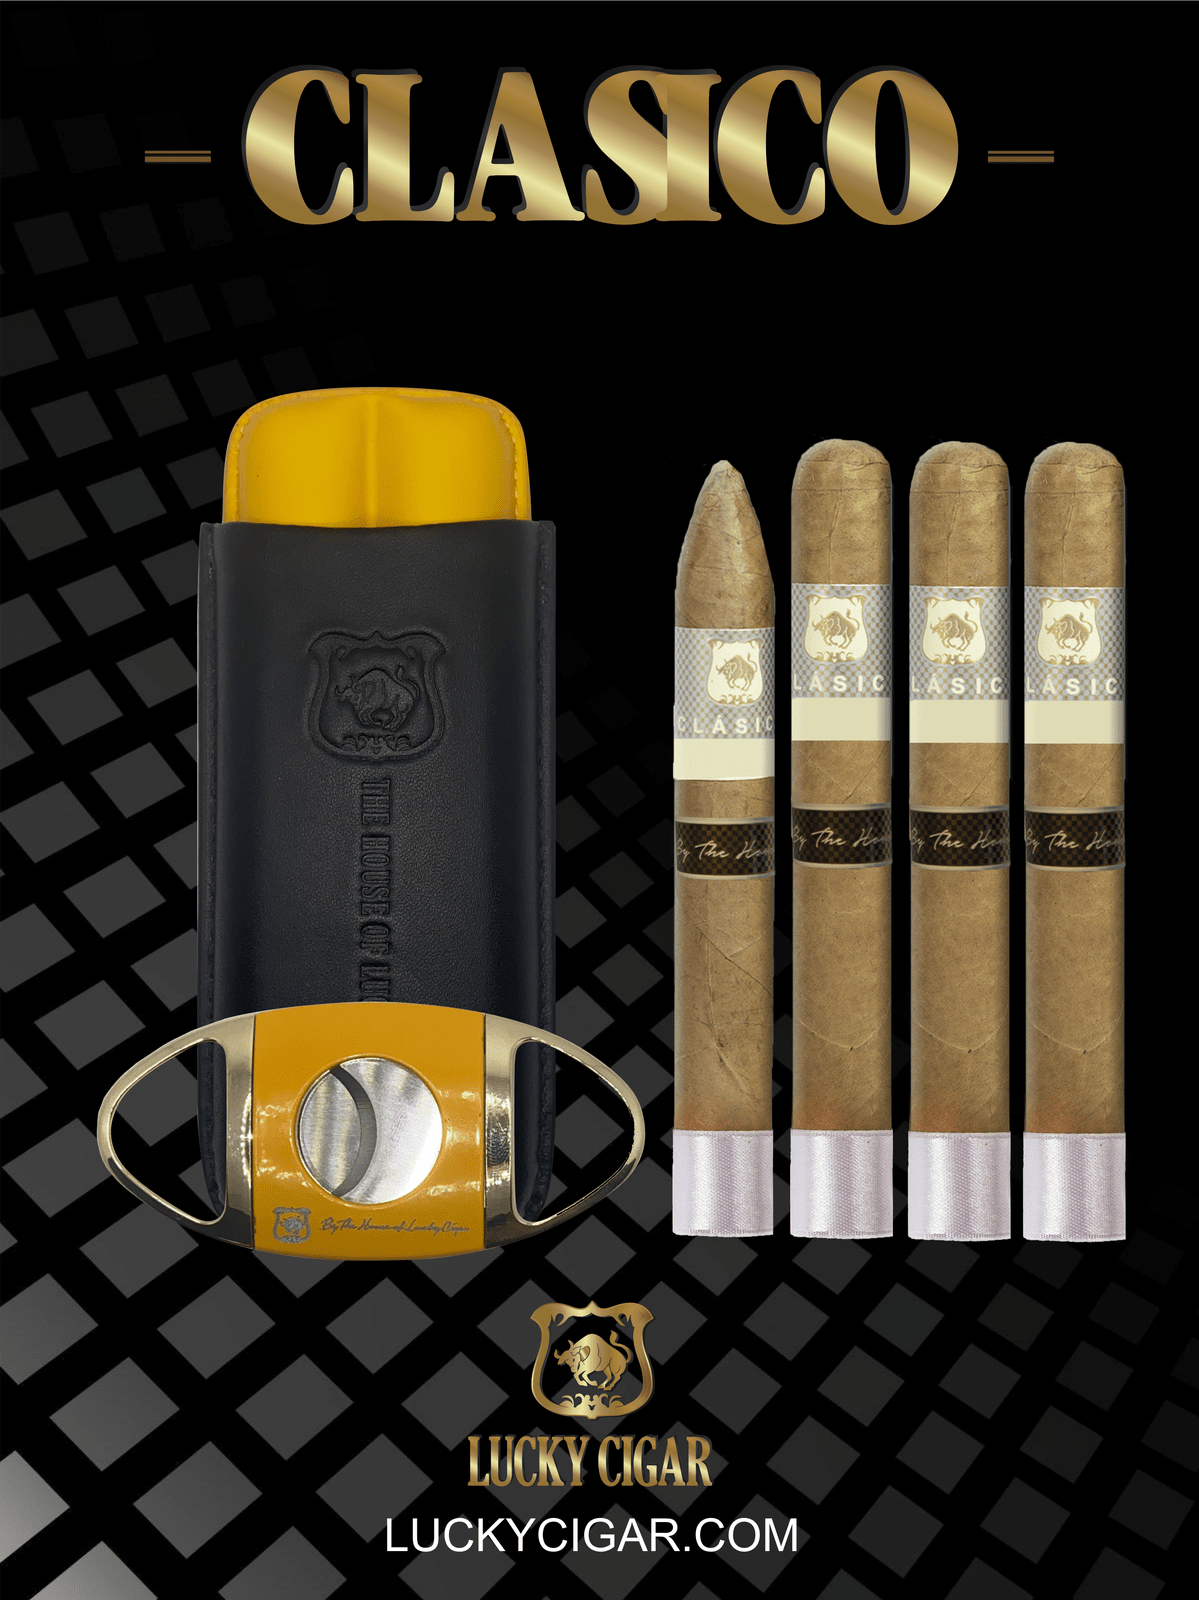 Classic Cigars - Classico by Lucky Cigar: Set of 4 Cigars, 3 Toro, 1 Torpedo with Cutter, Humidor